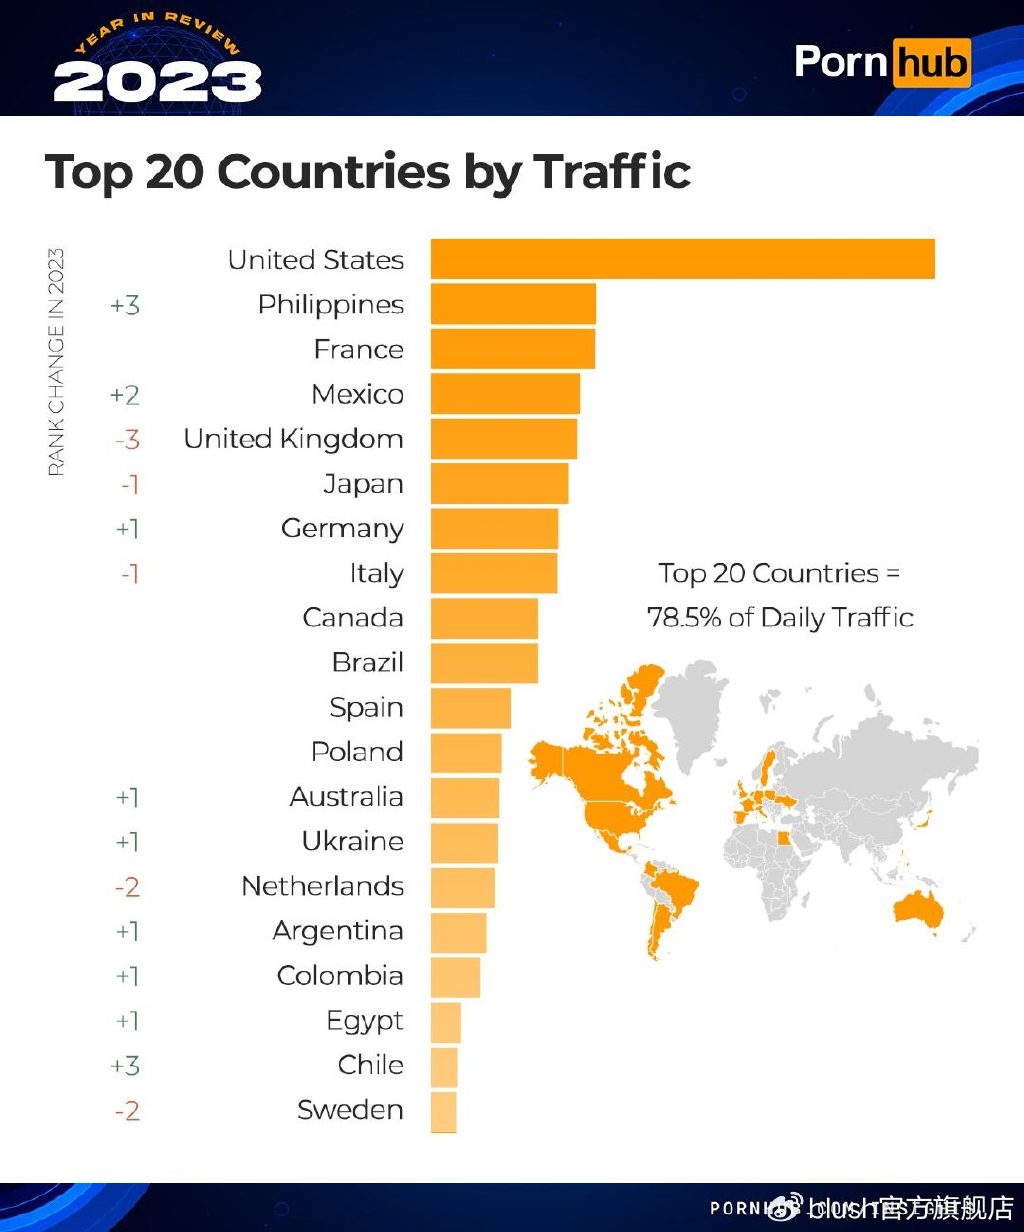 pornhub-insights-2023-year-in-review-top-20-countries.jpg